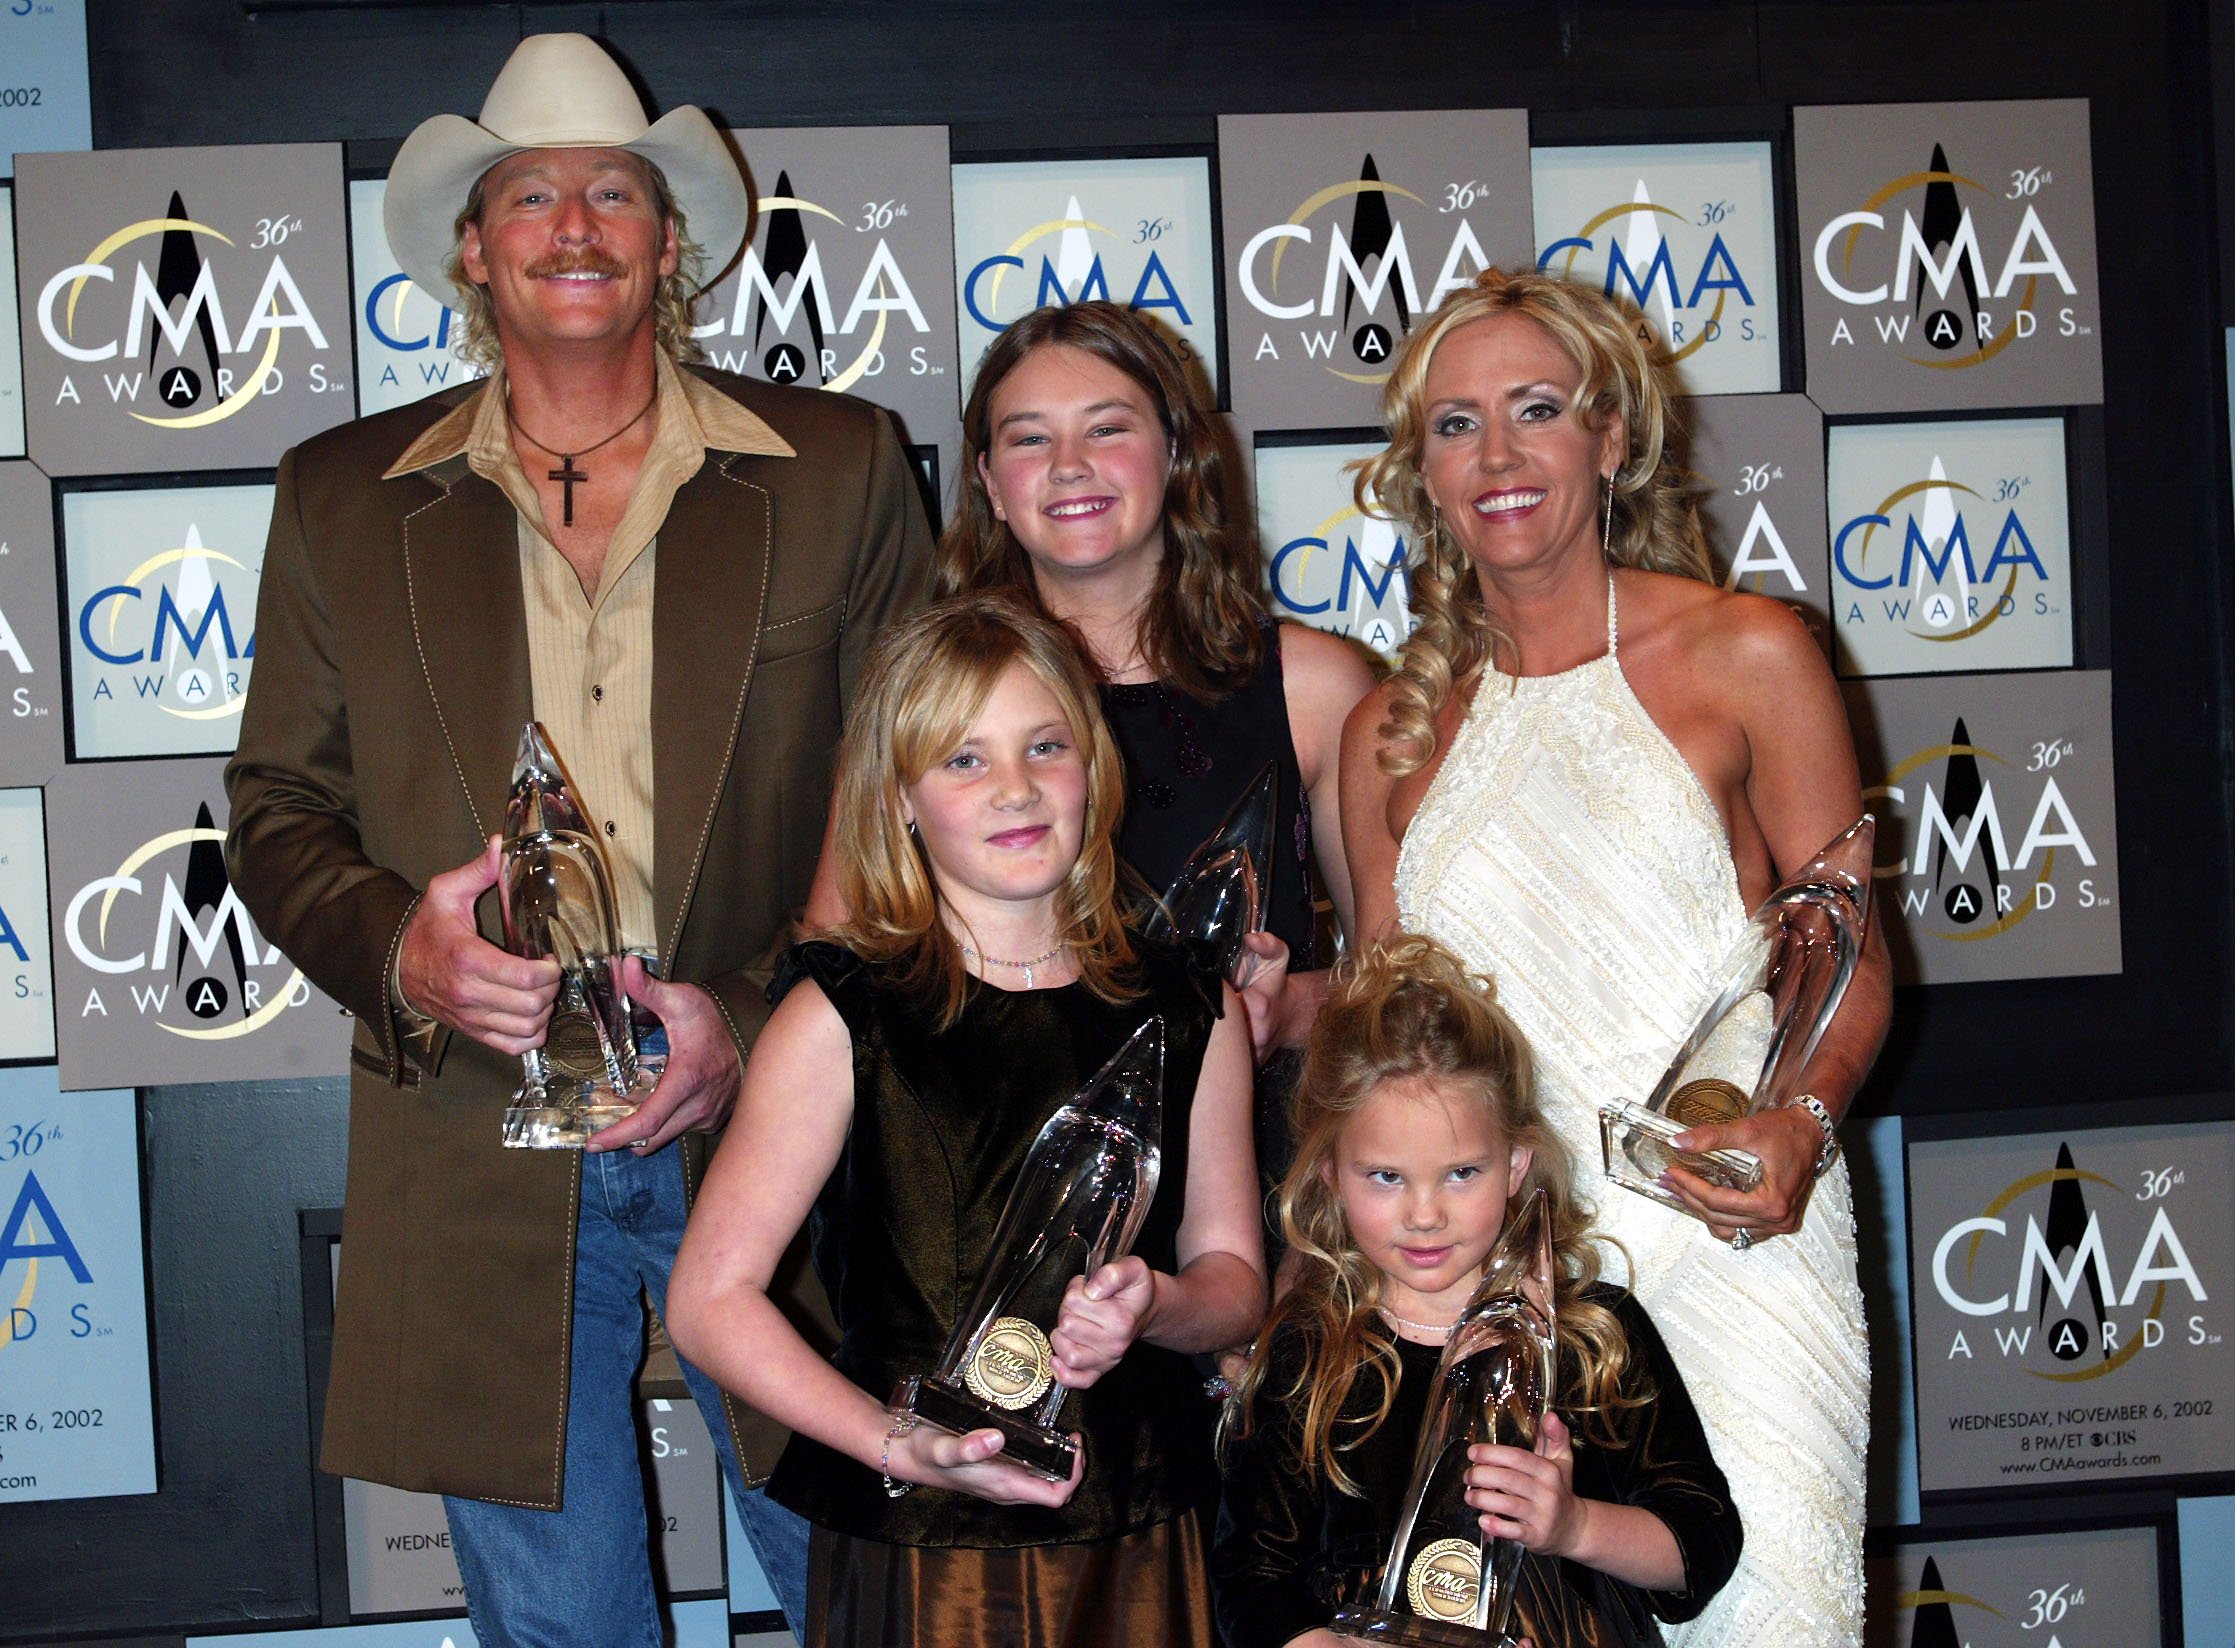 Alan Jackson poses with his 5 awards with a little help from his family - wife Denise, and Daughters Mattie - 12, Ali - 9, and Dani - 5, at the 36th annual Country Music Association Awards at the Grand Ole Opry House in Nashville, Tennessee, November 6, 2002. | Source: Getty Images